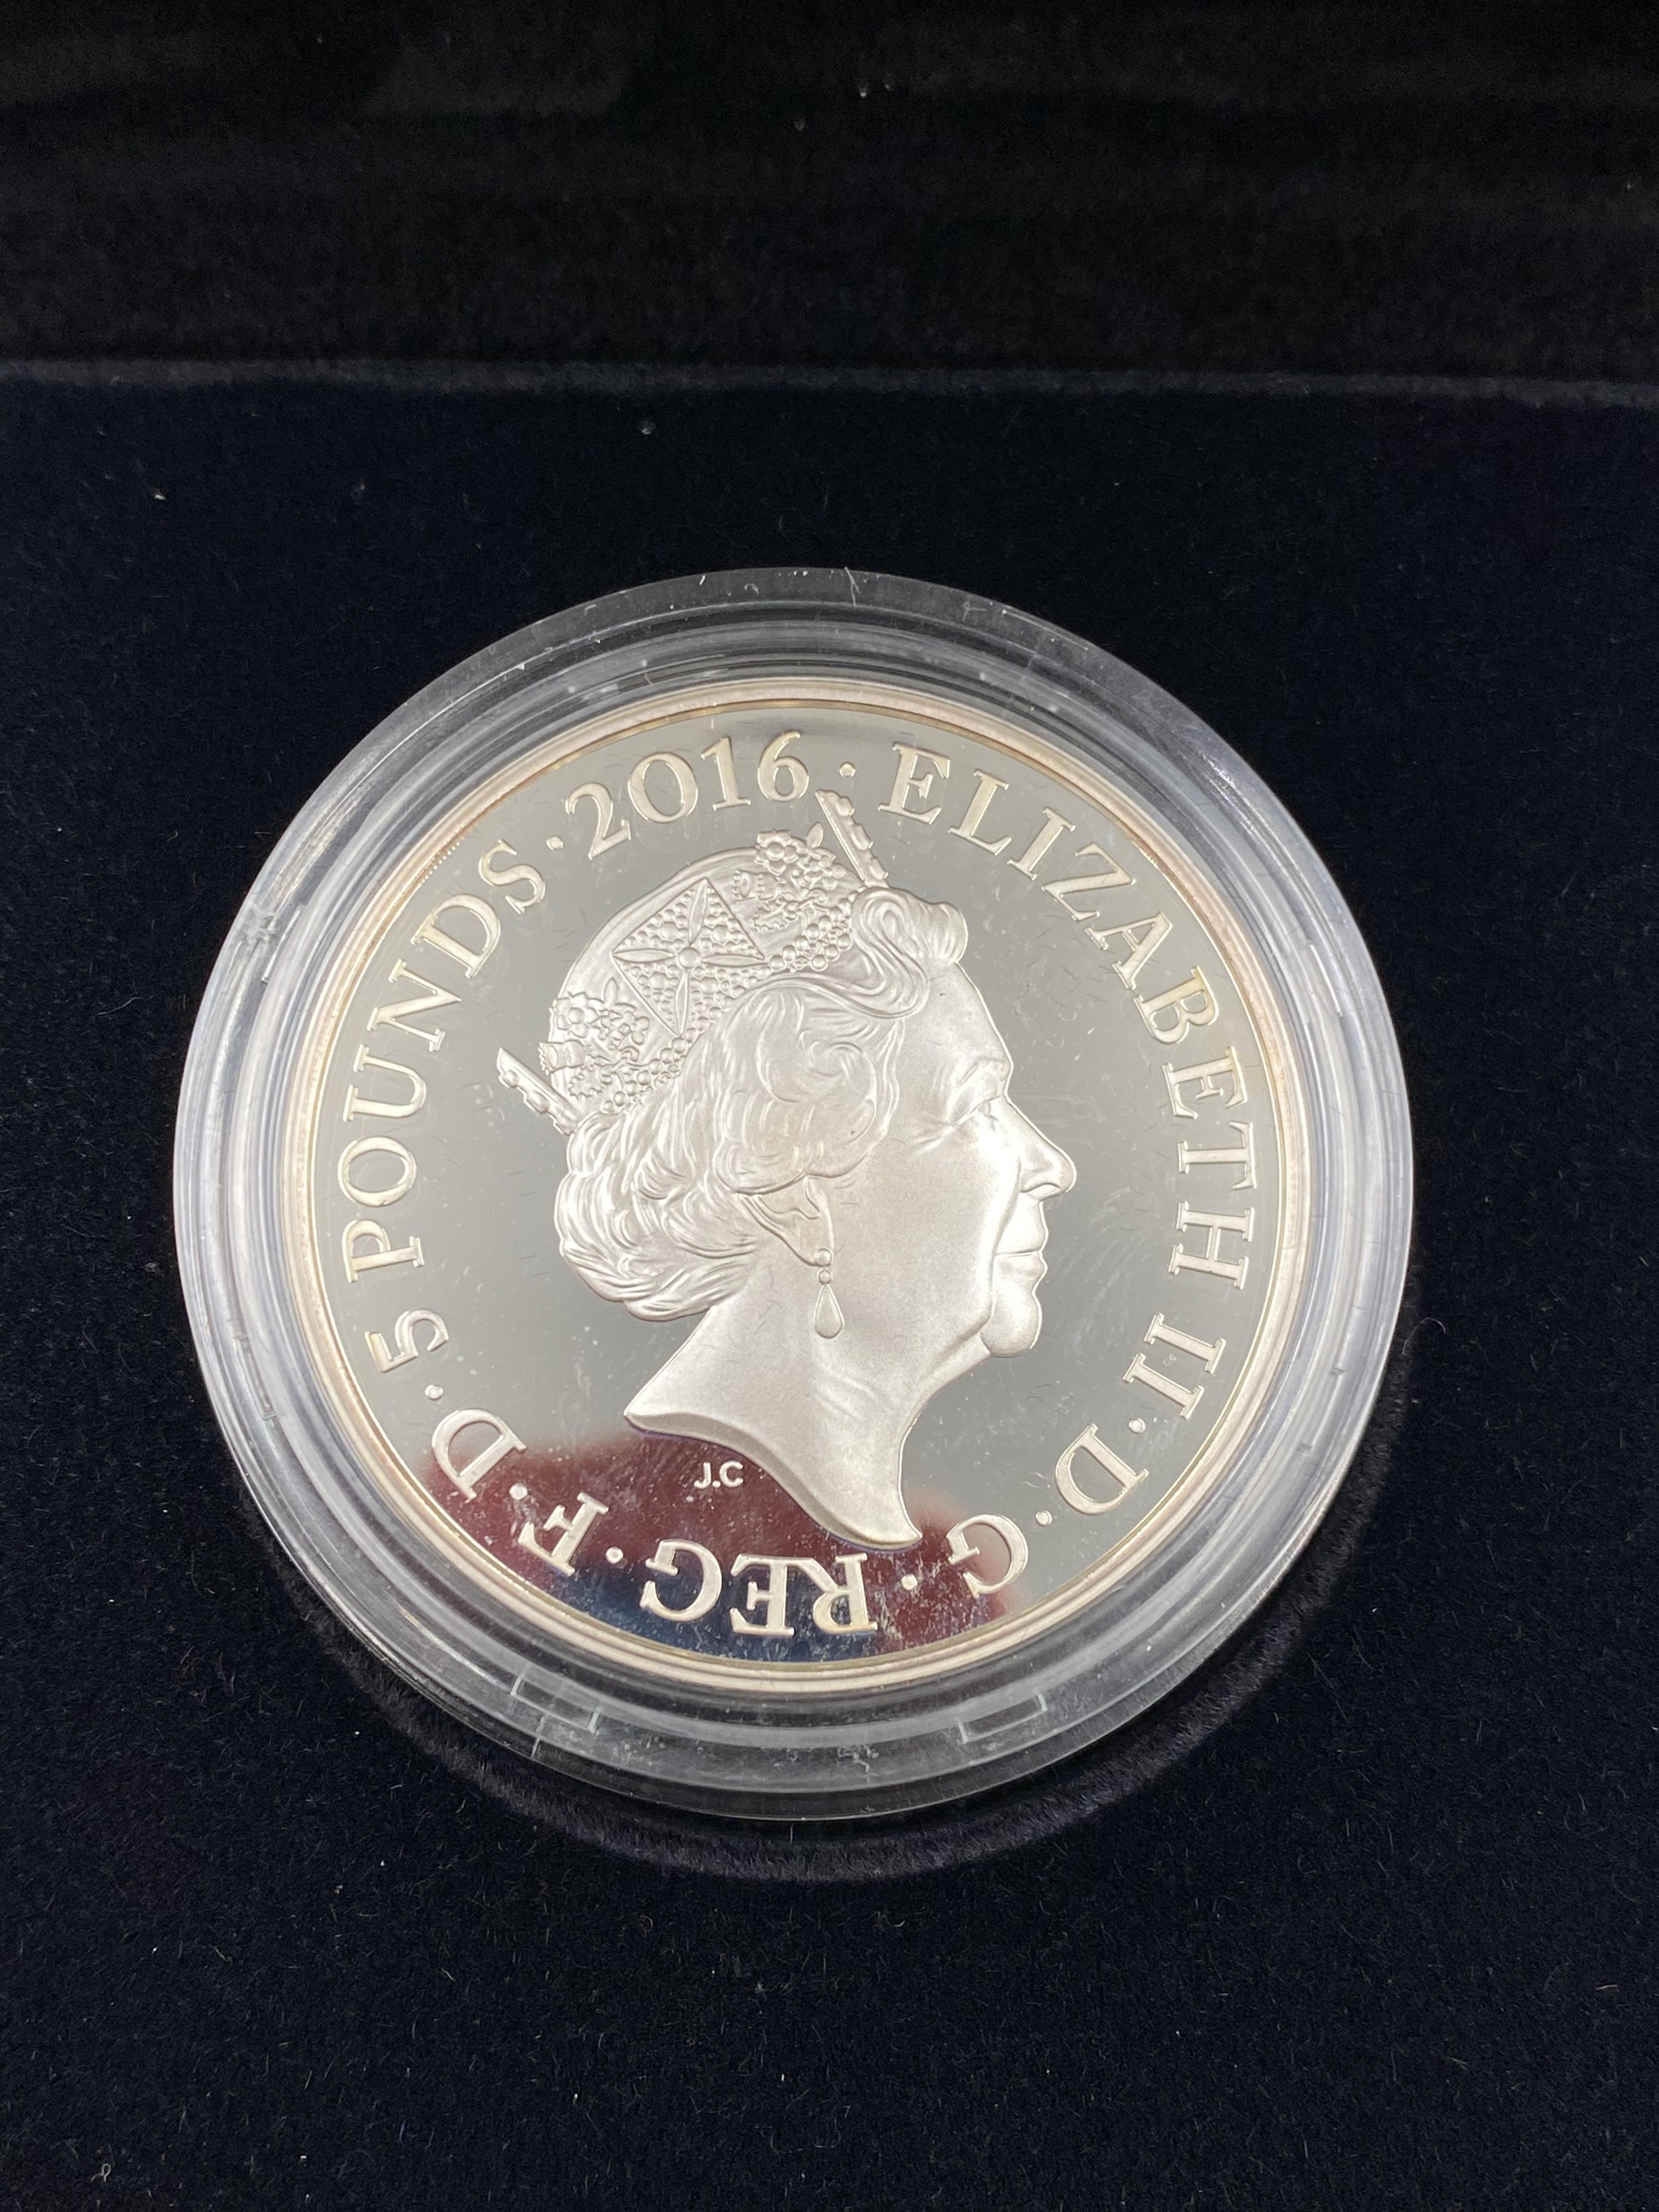 Royal Mint 90th Birthday of Her Majesty The Queen £5 silver proof coin - Image 4 of 4